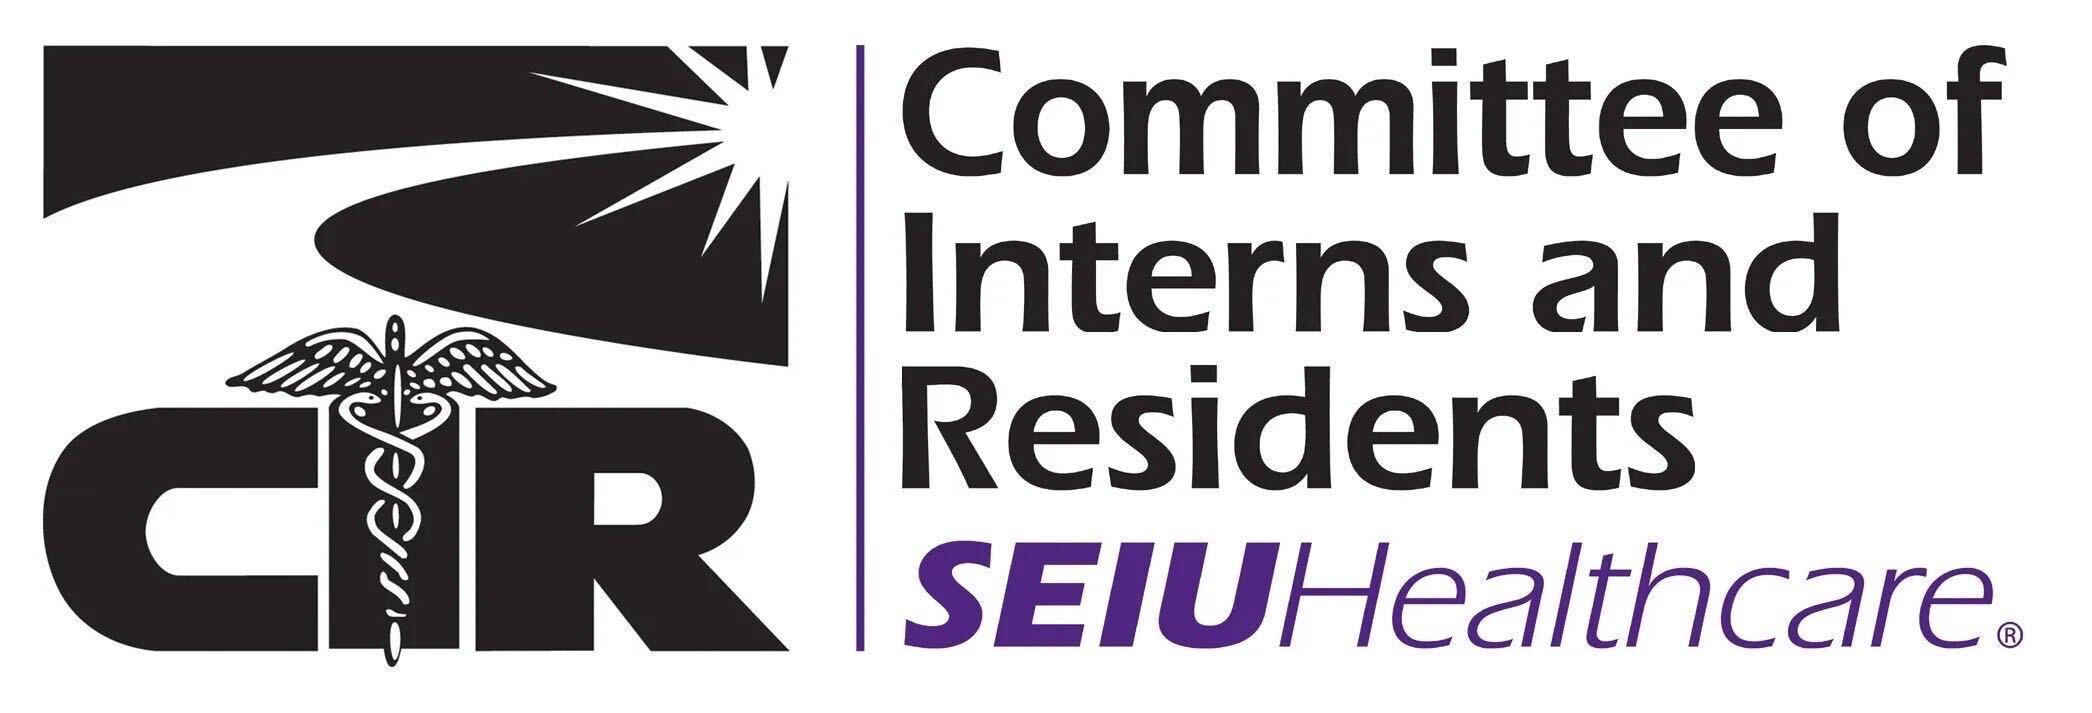 Committee of Interns & Residents logo